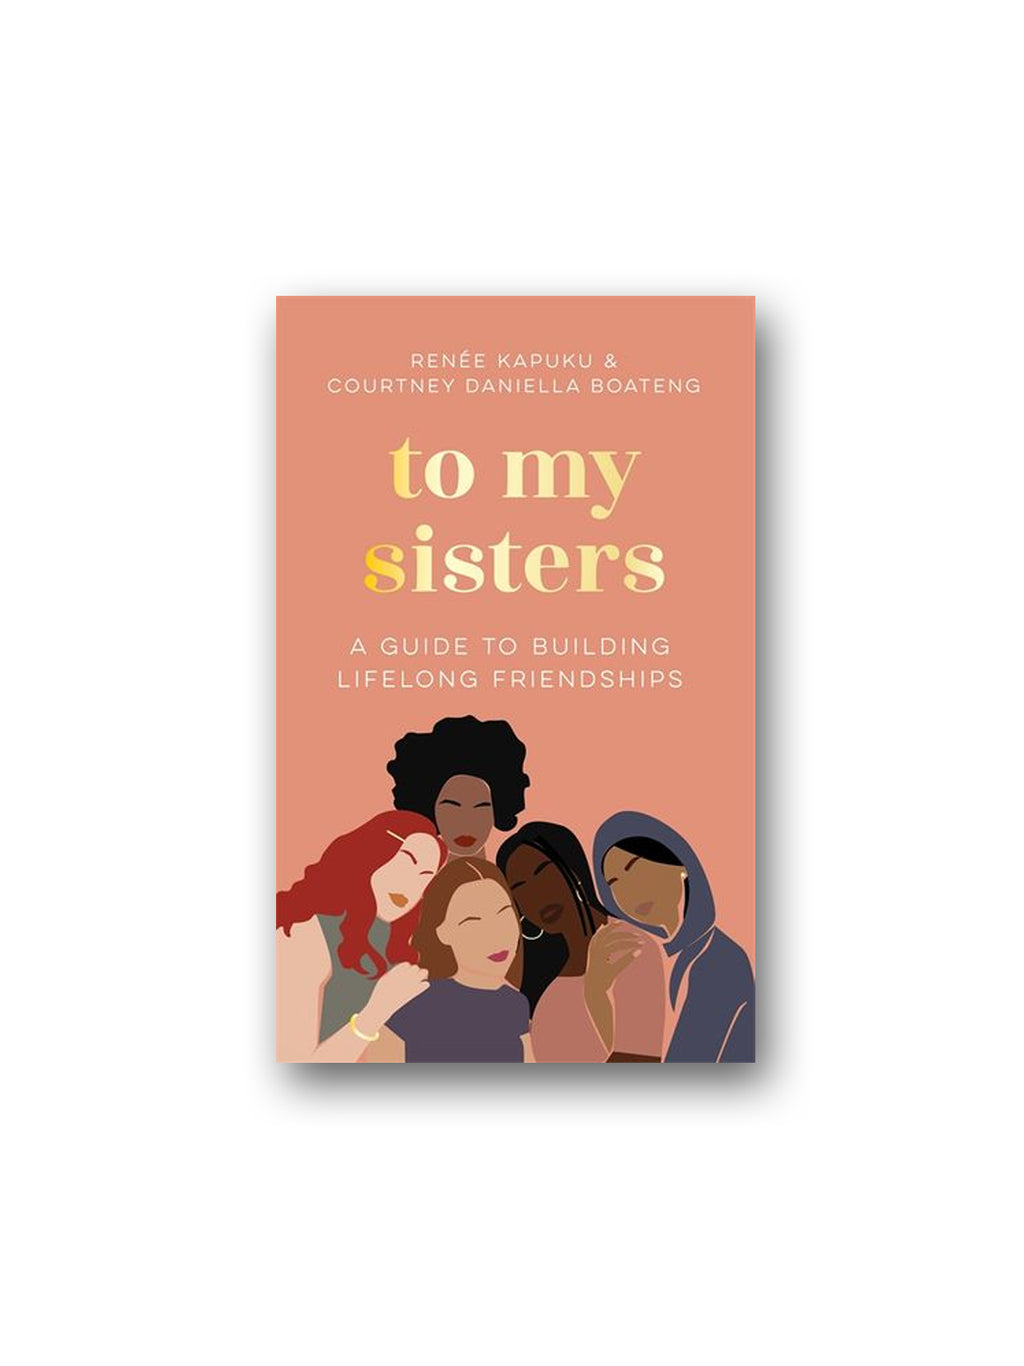 To My Sisters: A Guide to Building Lifelong Friendships